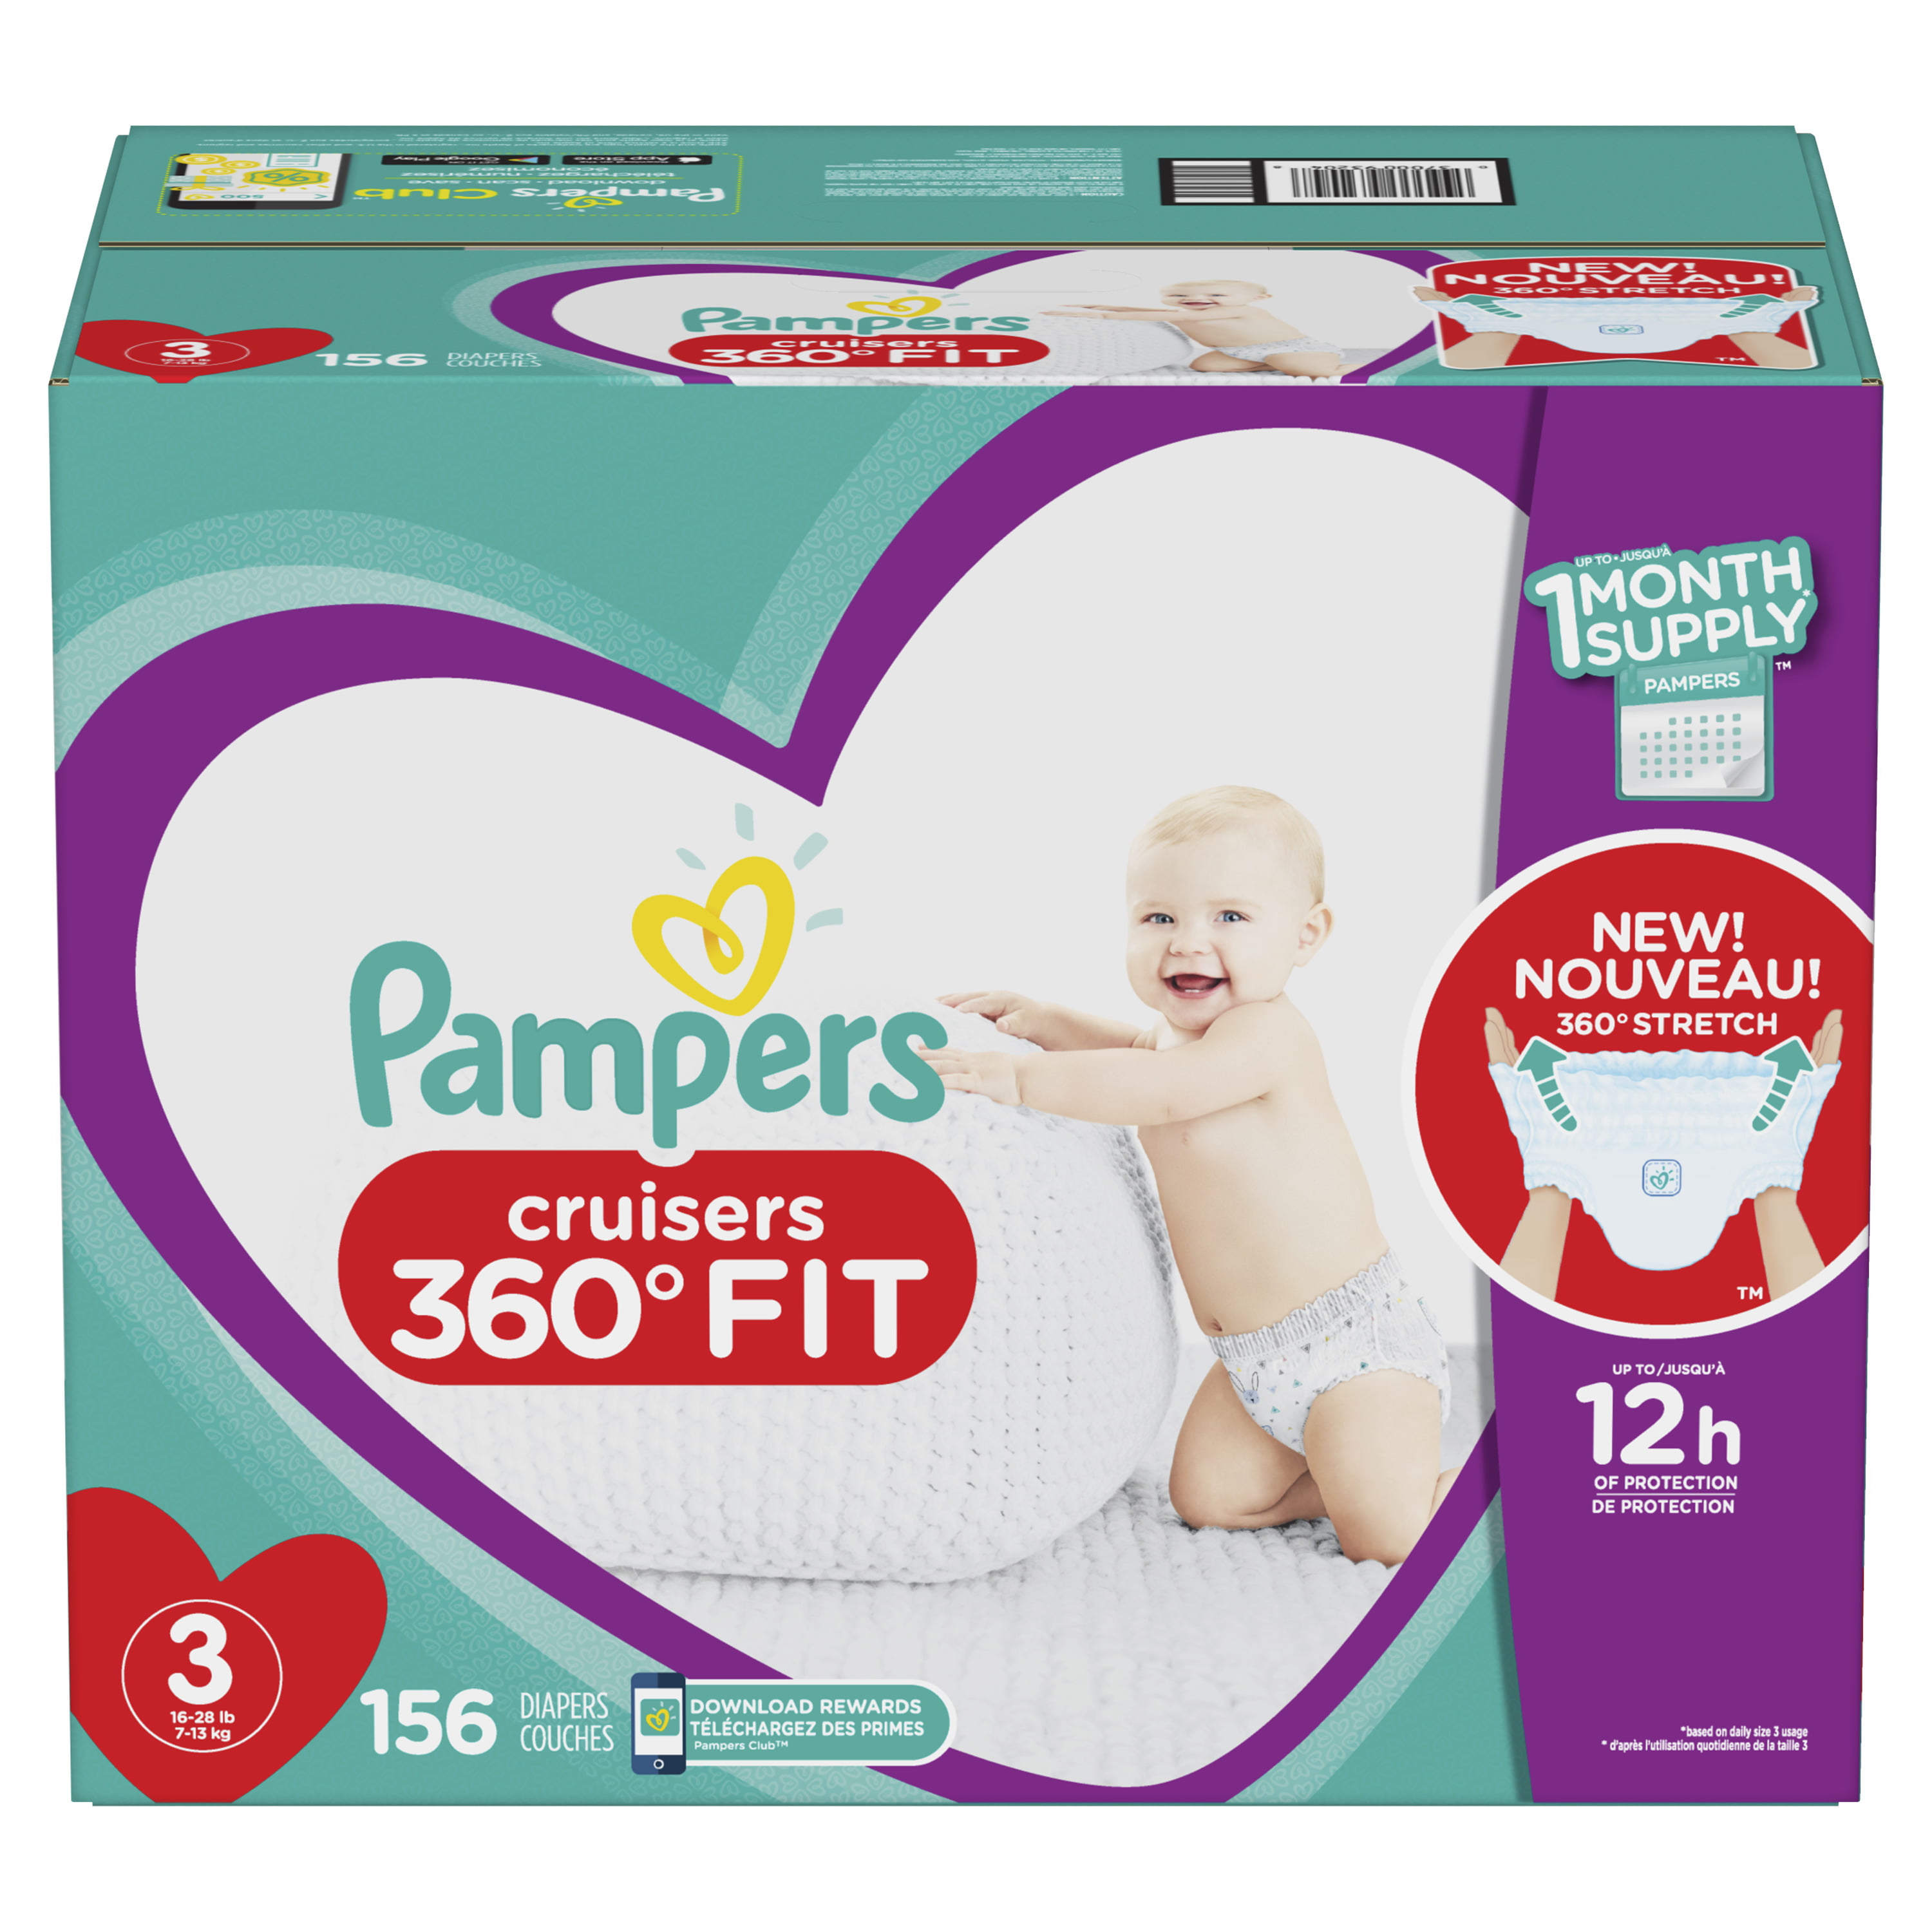 Pampers Cruisers Diaper Size Chart